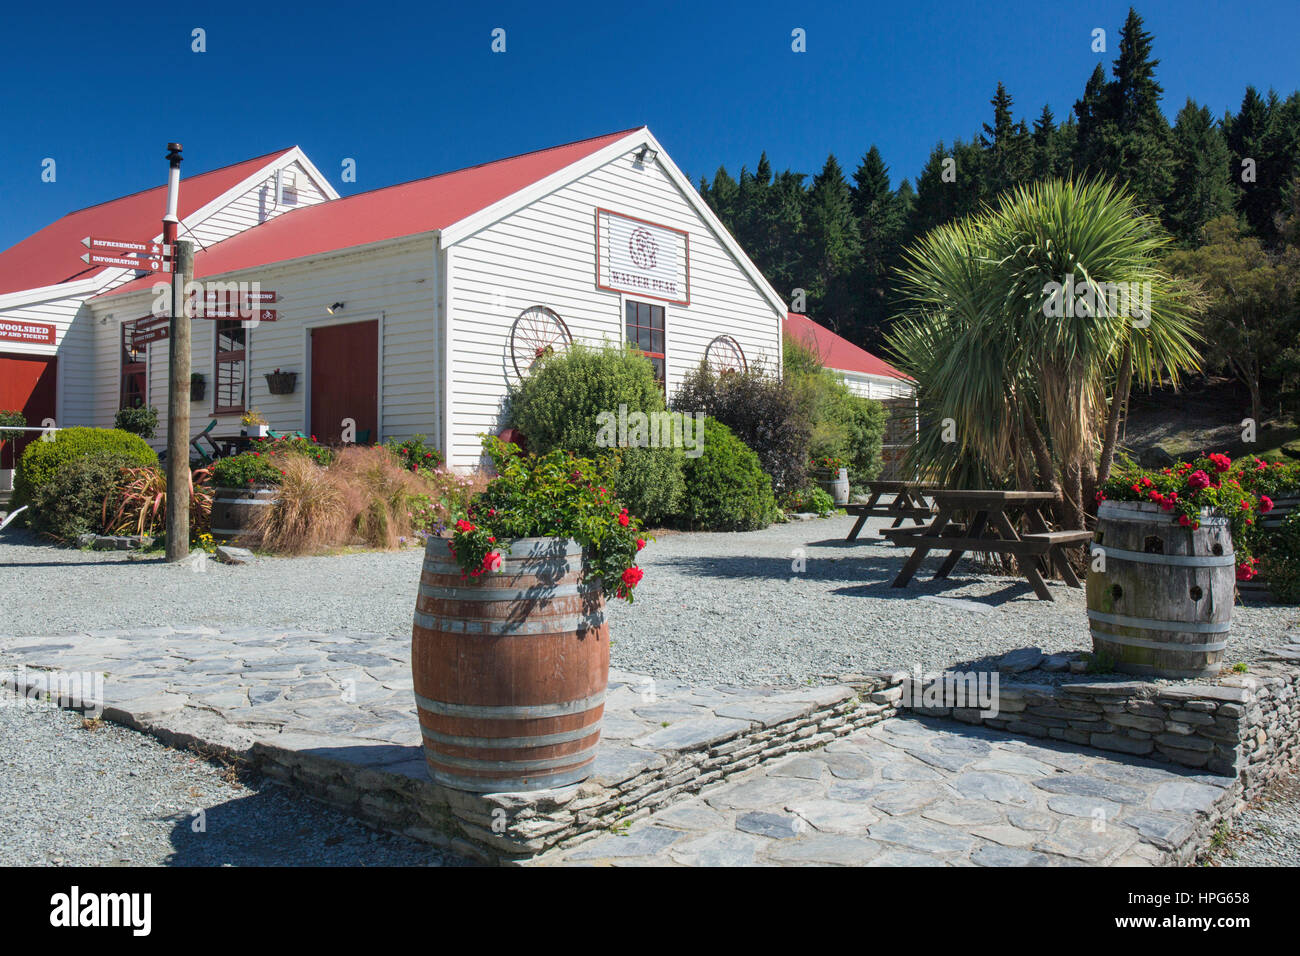 Queenstown, Otago, New Zealand. Colourful buildings and picnic area at Walter Peak High Country Farm, Lake Wakatipu. Stock Photo